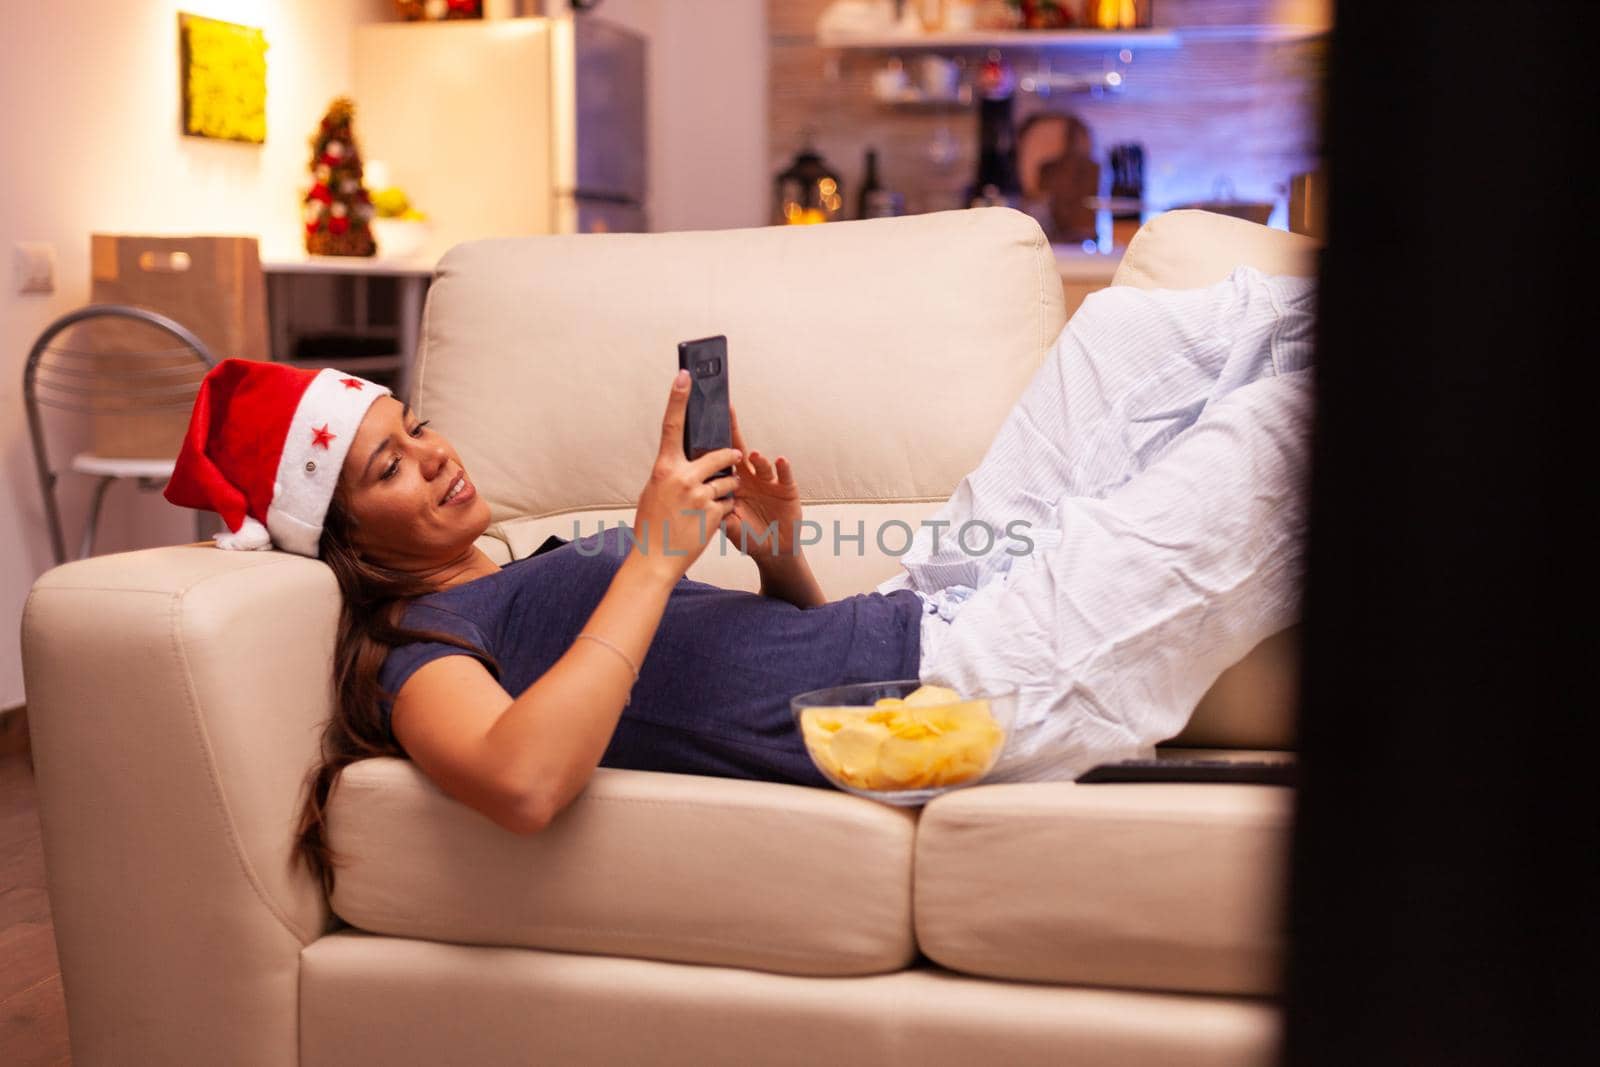 Girl messaging with friend using smartphone resting on couch in xmas decorated kitchen. Woman browsing on social media, texting during christmas holiday enjoying winter season